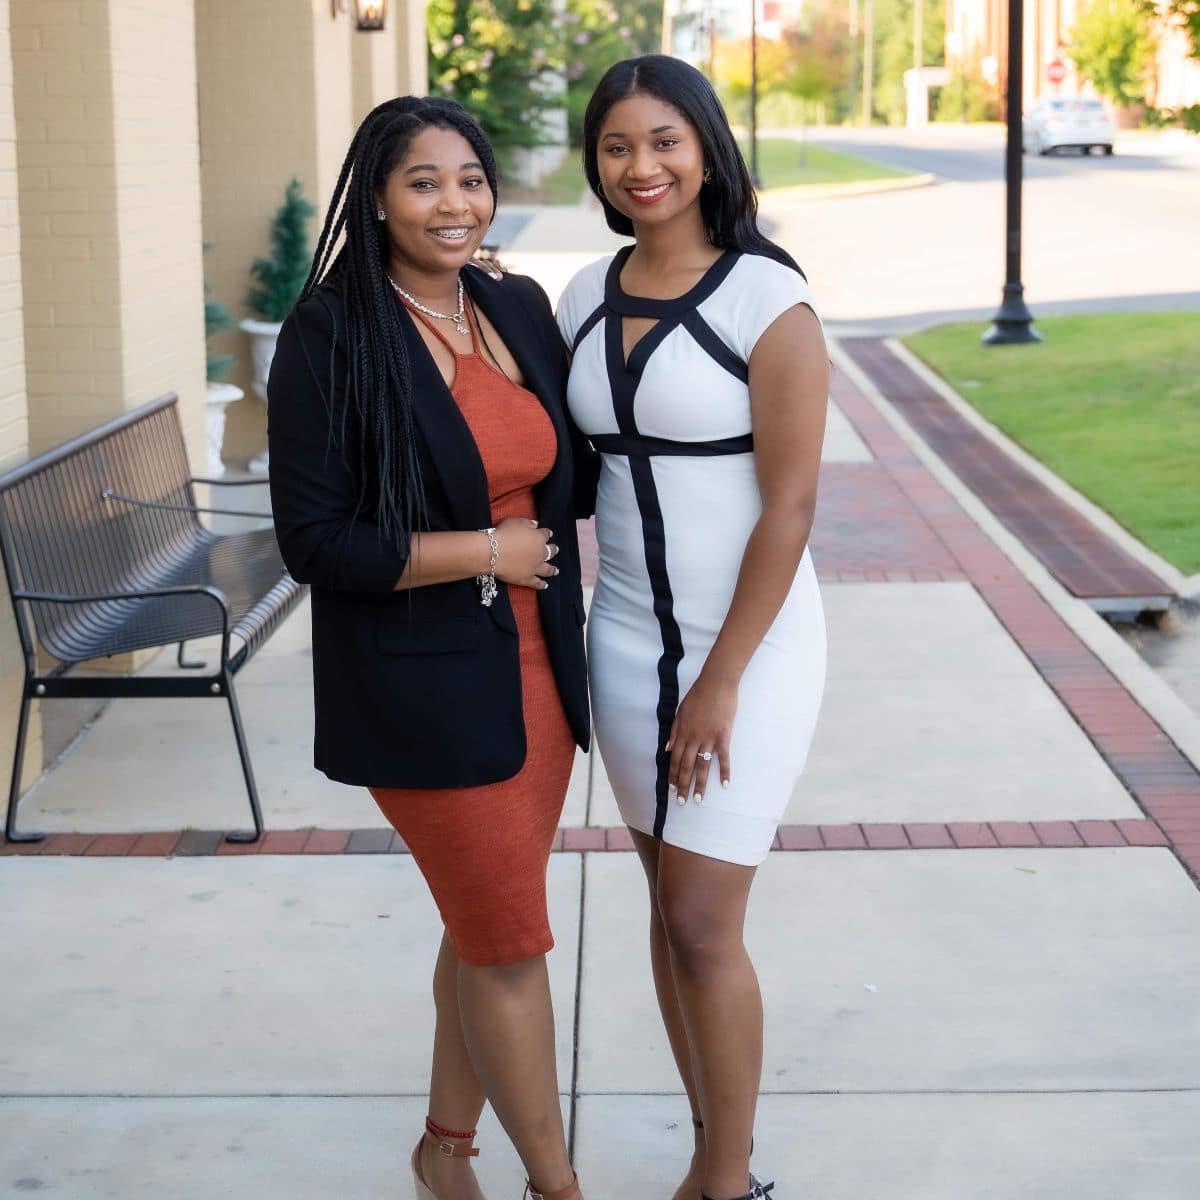 Tonia Brown (right) and sister Toneen, who works in healthcare management and is studying to become a nurse, in a more recent photo.